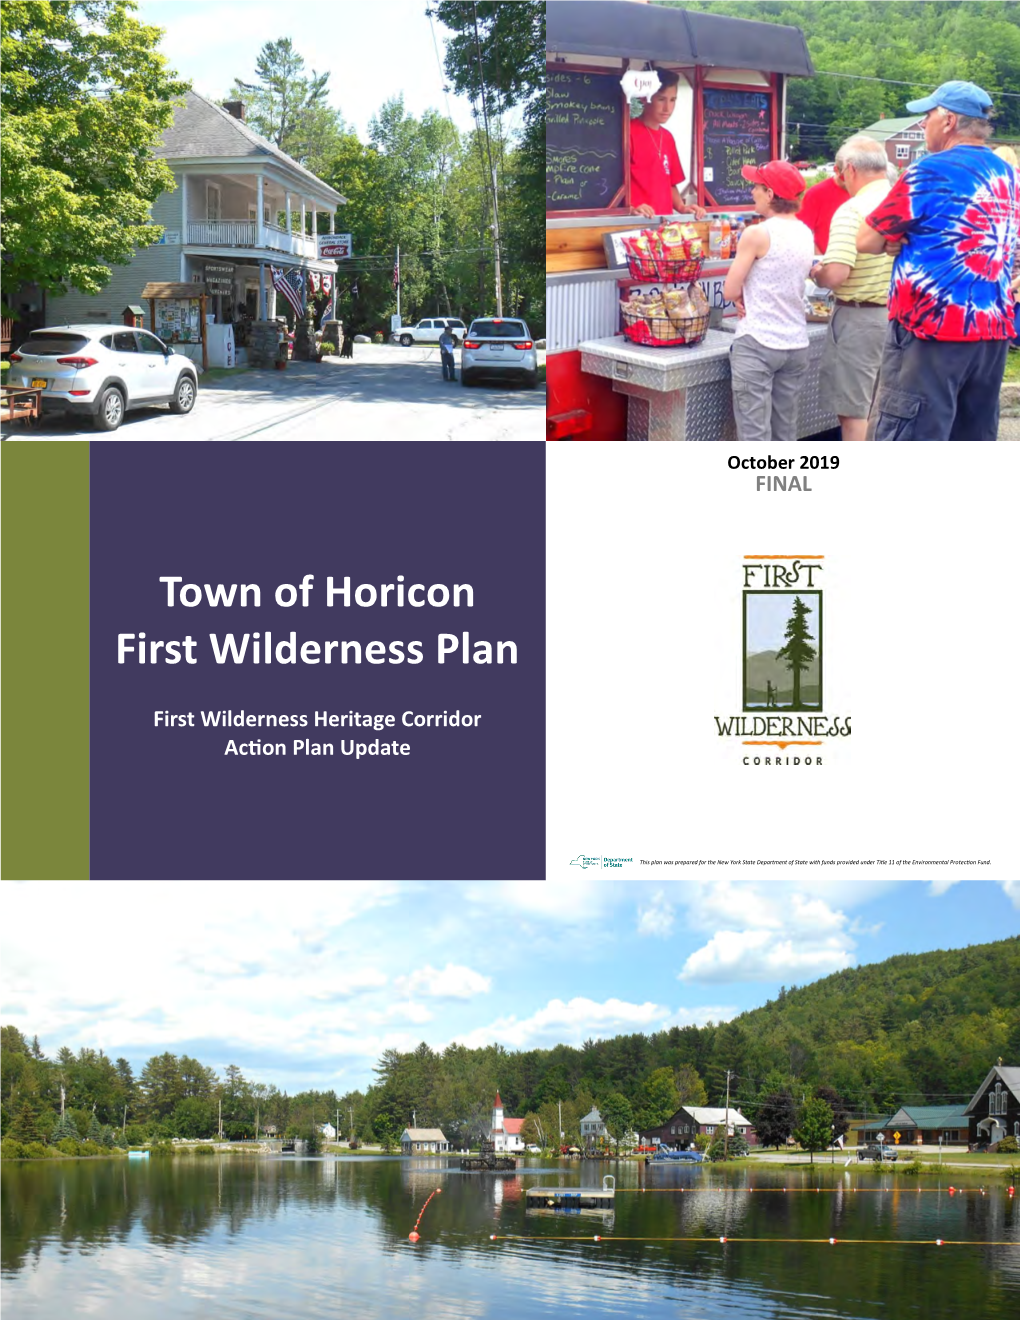 Town of Horicon First Wilderness Plan